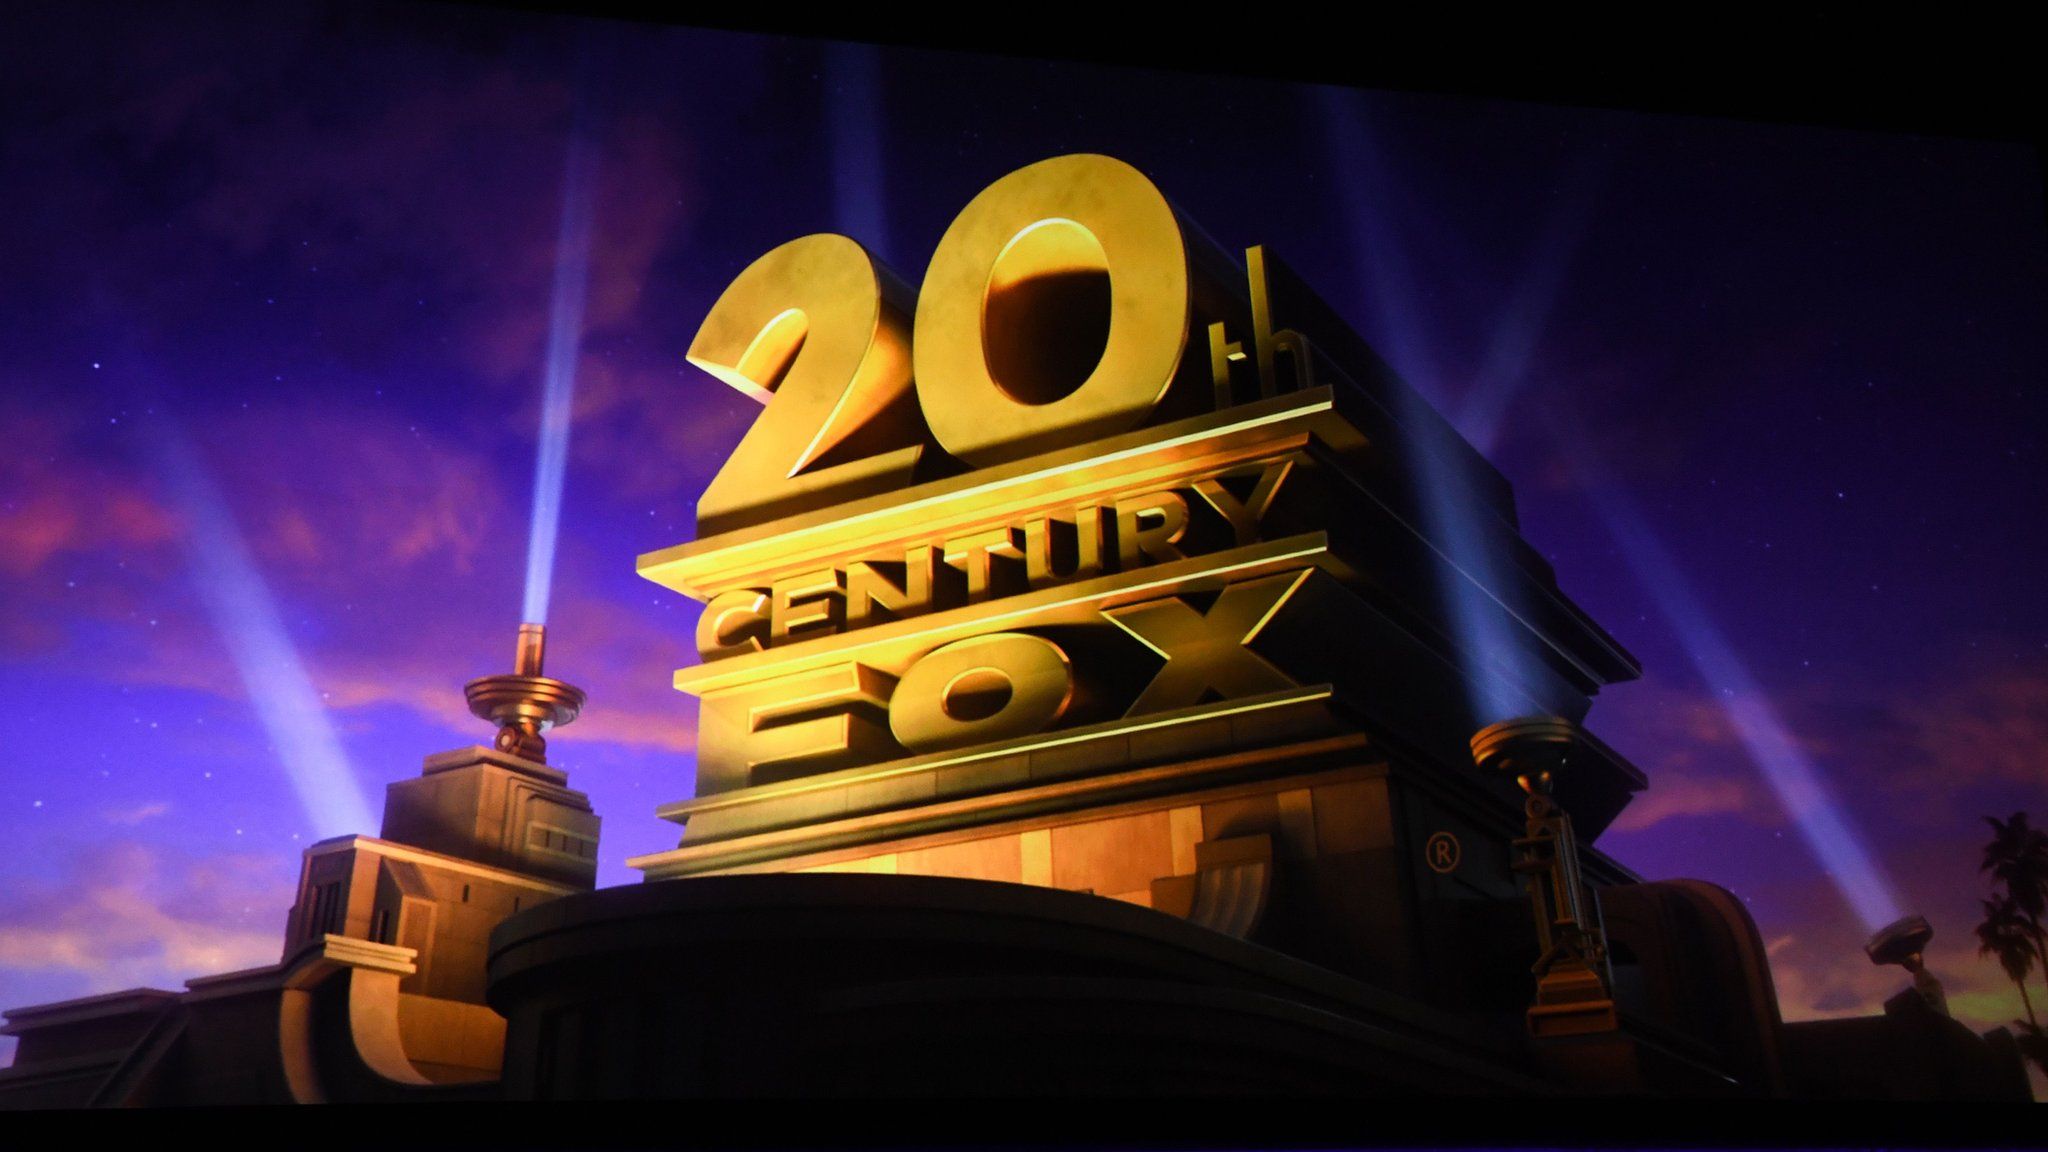 Disney ends the historic 20th Century Fox manufacturer